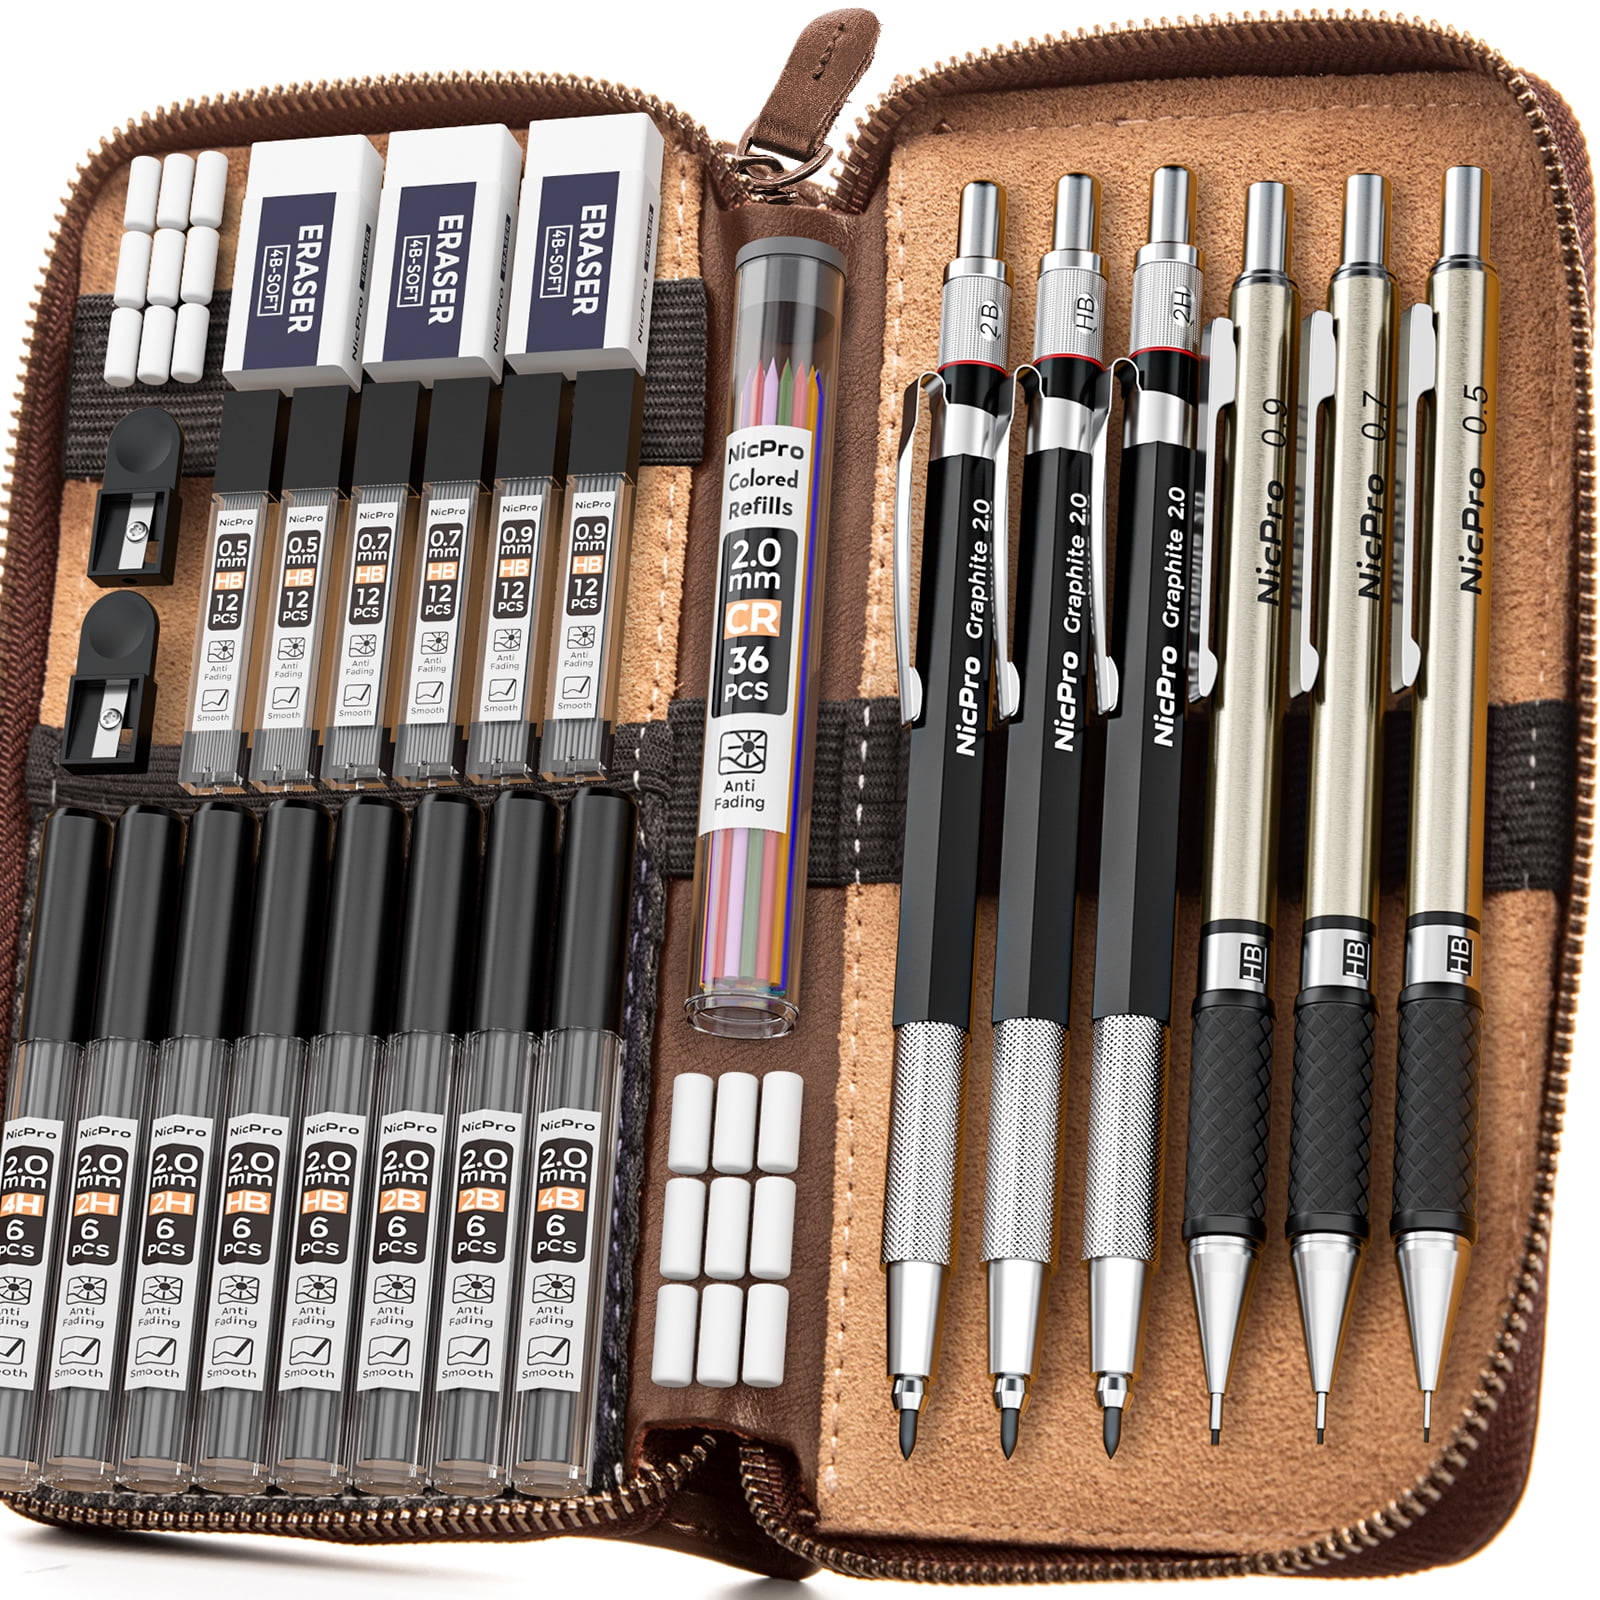 Painting Brushes Case with 15 Pincels